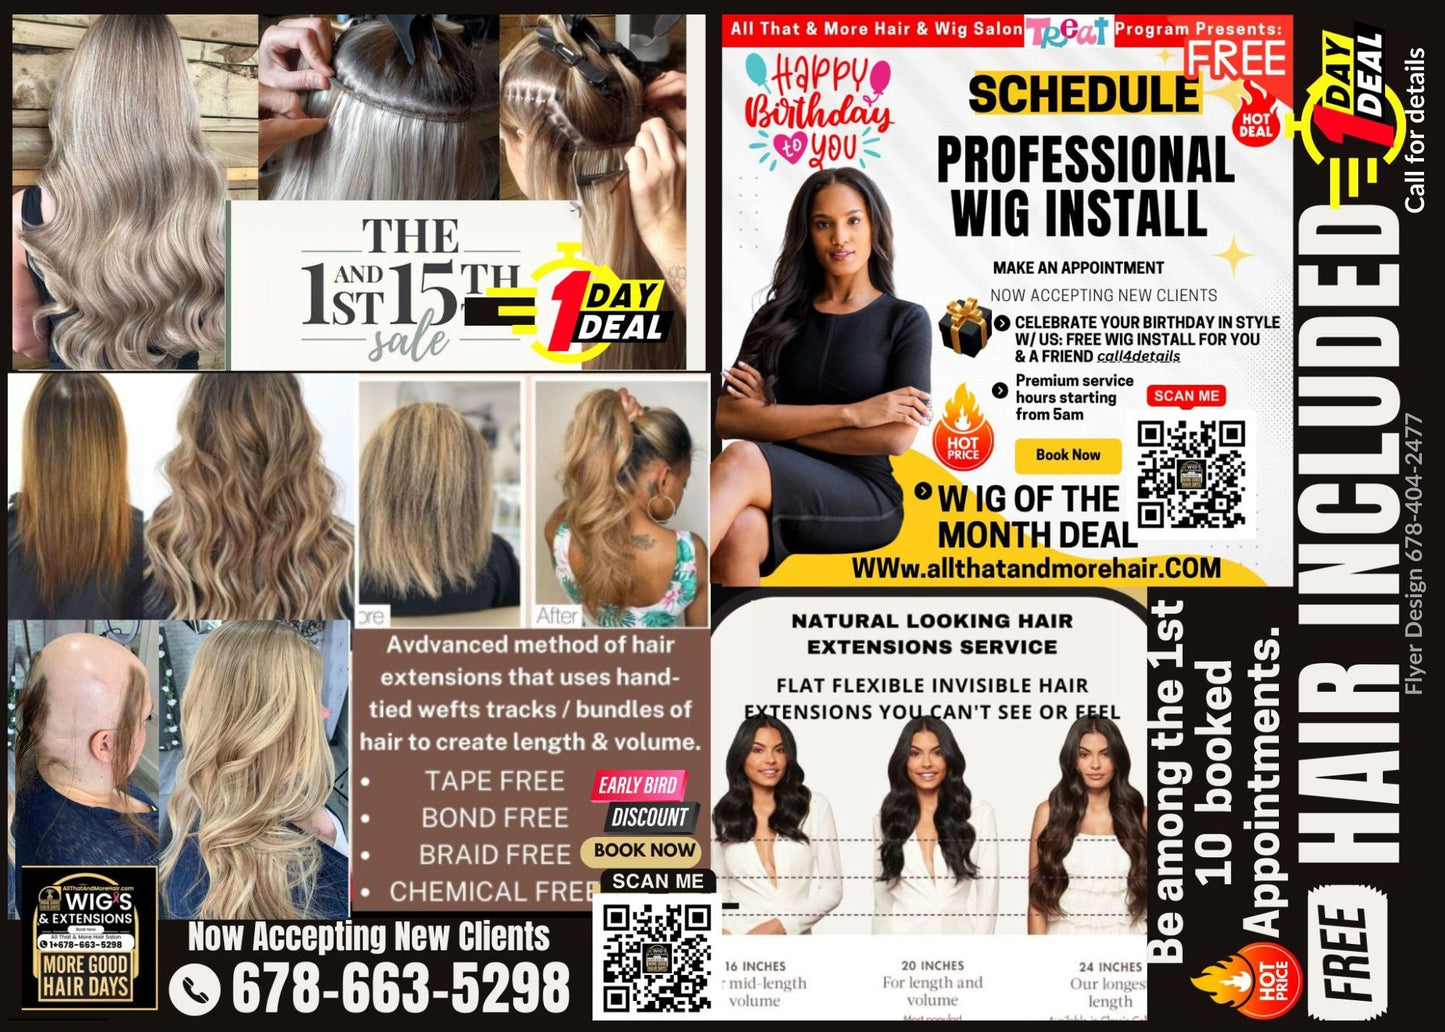 Transform Your Look: Hair Consultation & Scalp Evaluation + Hair Extension/Alternative Solutions Consultation (In-Person Showroom Visit)